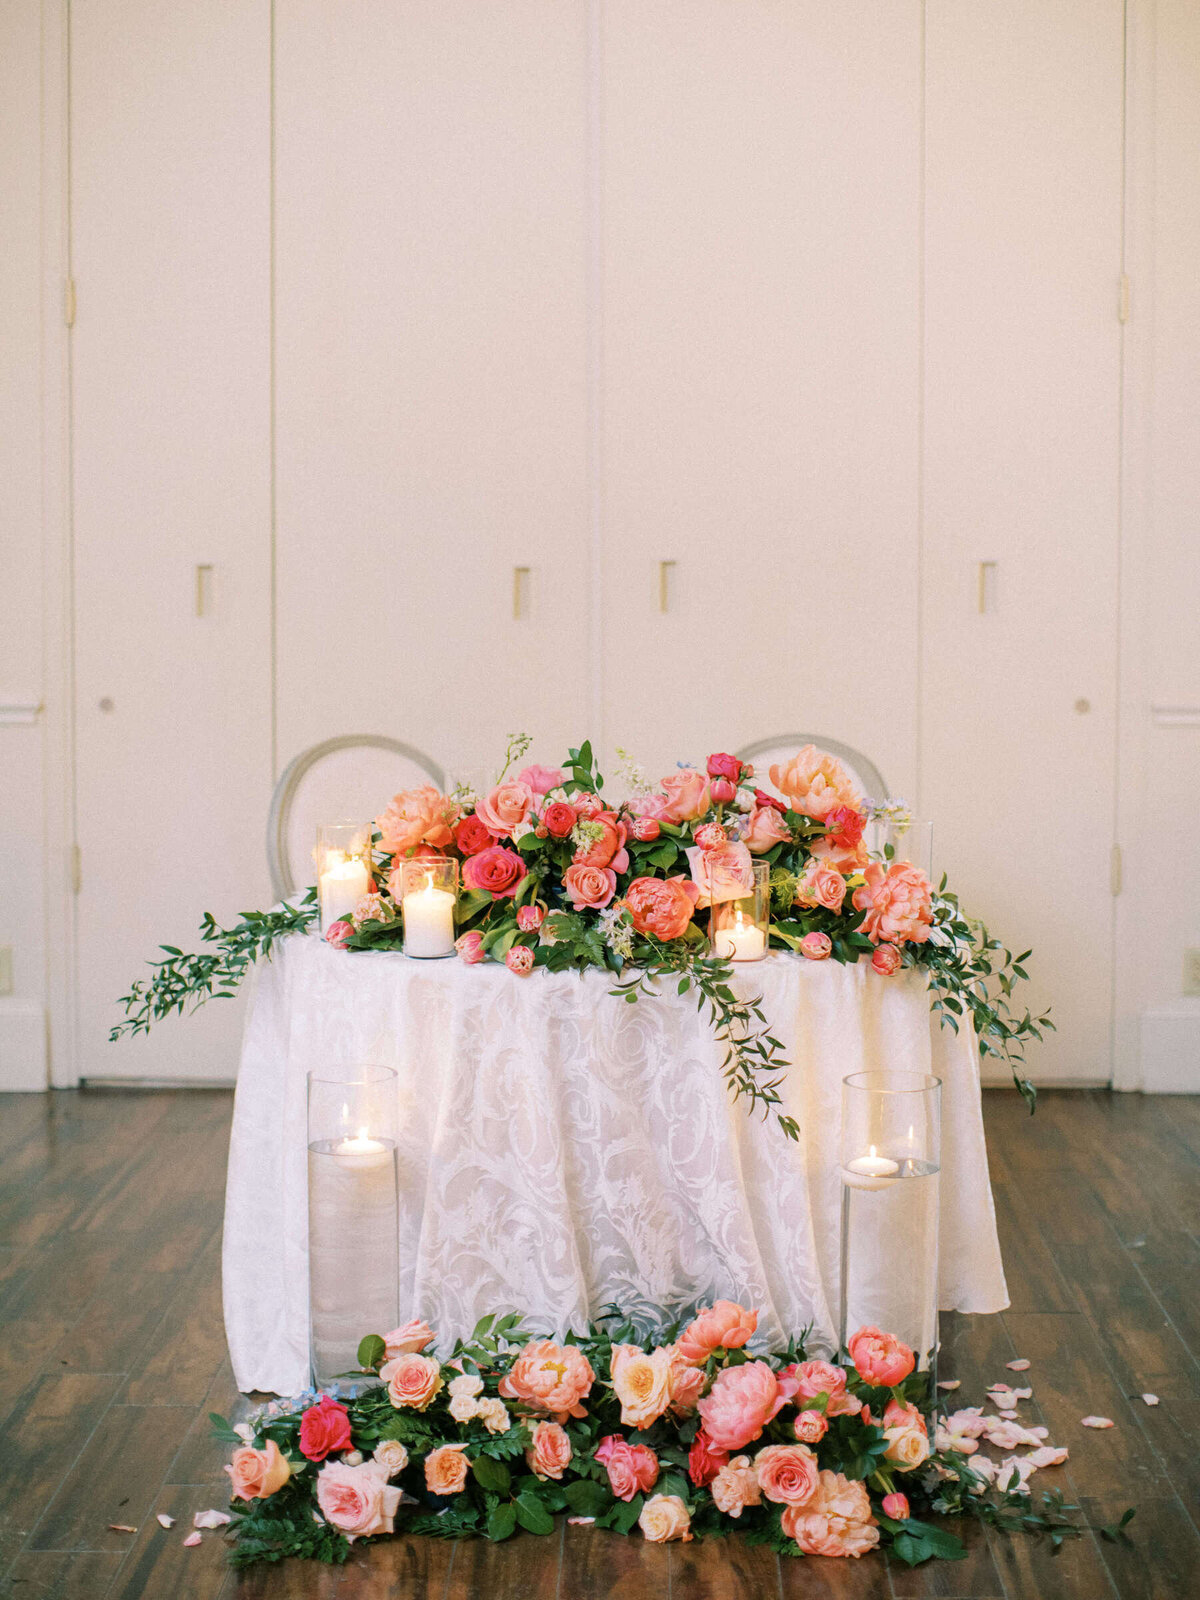 Colorful bridal table spilling with flowers and candles at Ashton Gardens wedding venue